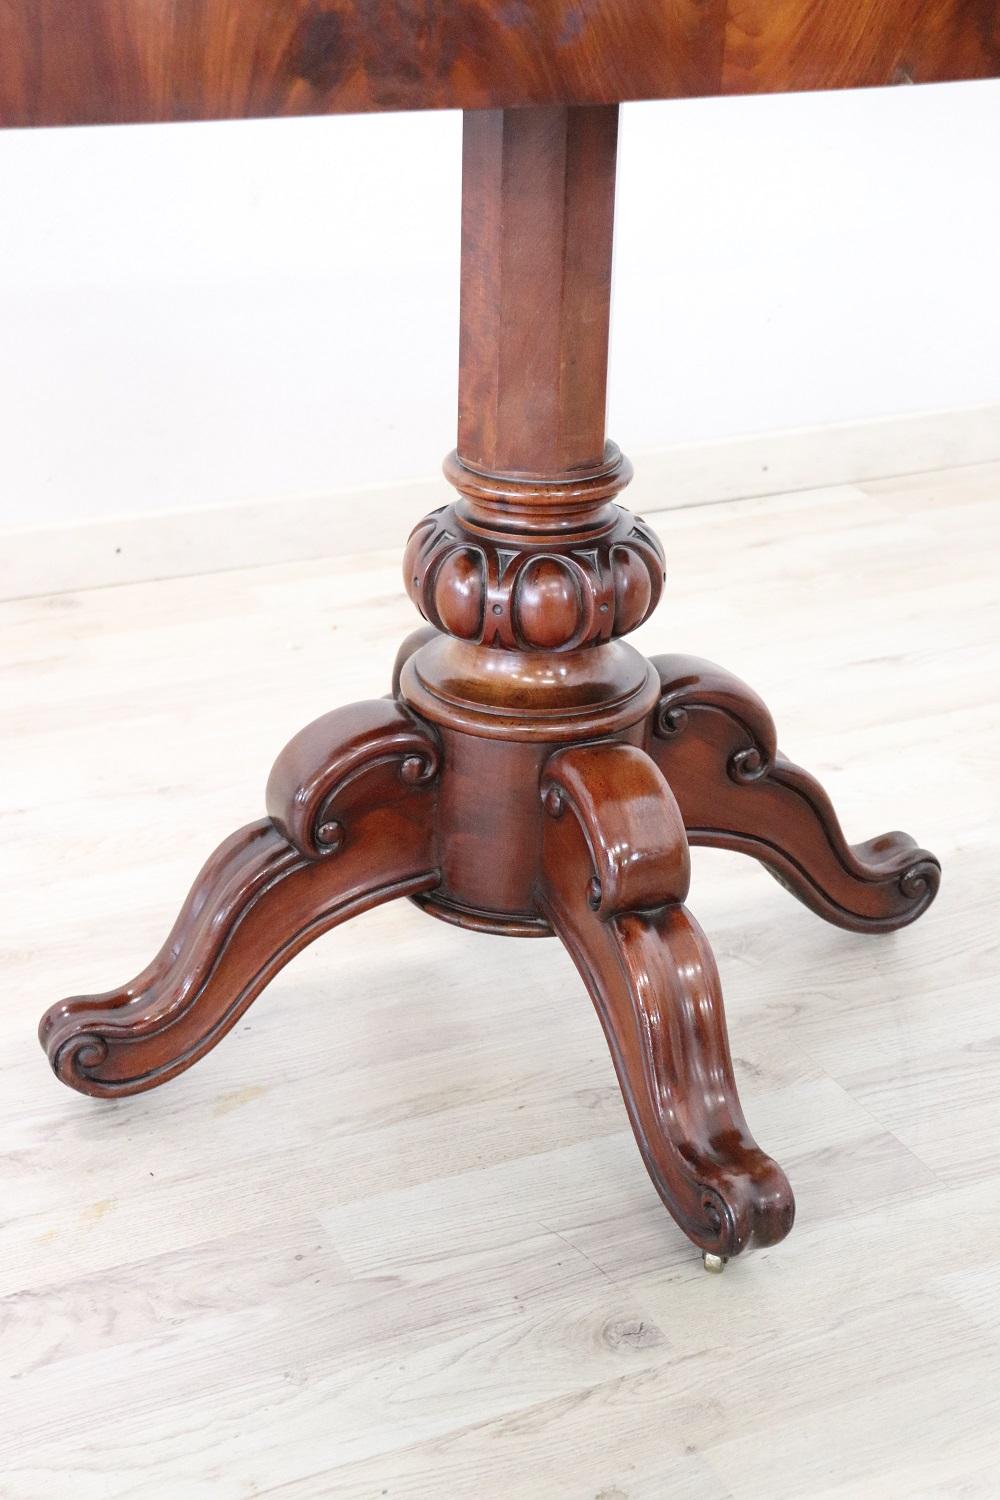 Beautiful antique game table in precious mahogany wood carved. When the table is closed, the table becomes smaller and can be used as an elegant console. The opening is very simple. The open top is covered with green cloth suitable for the game